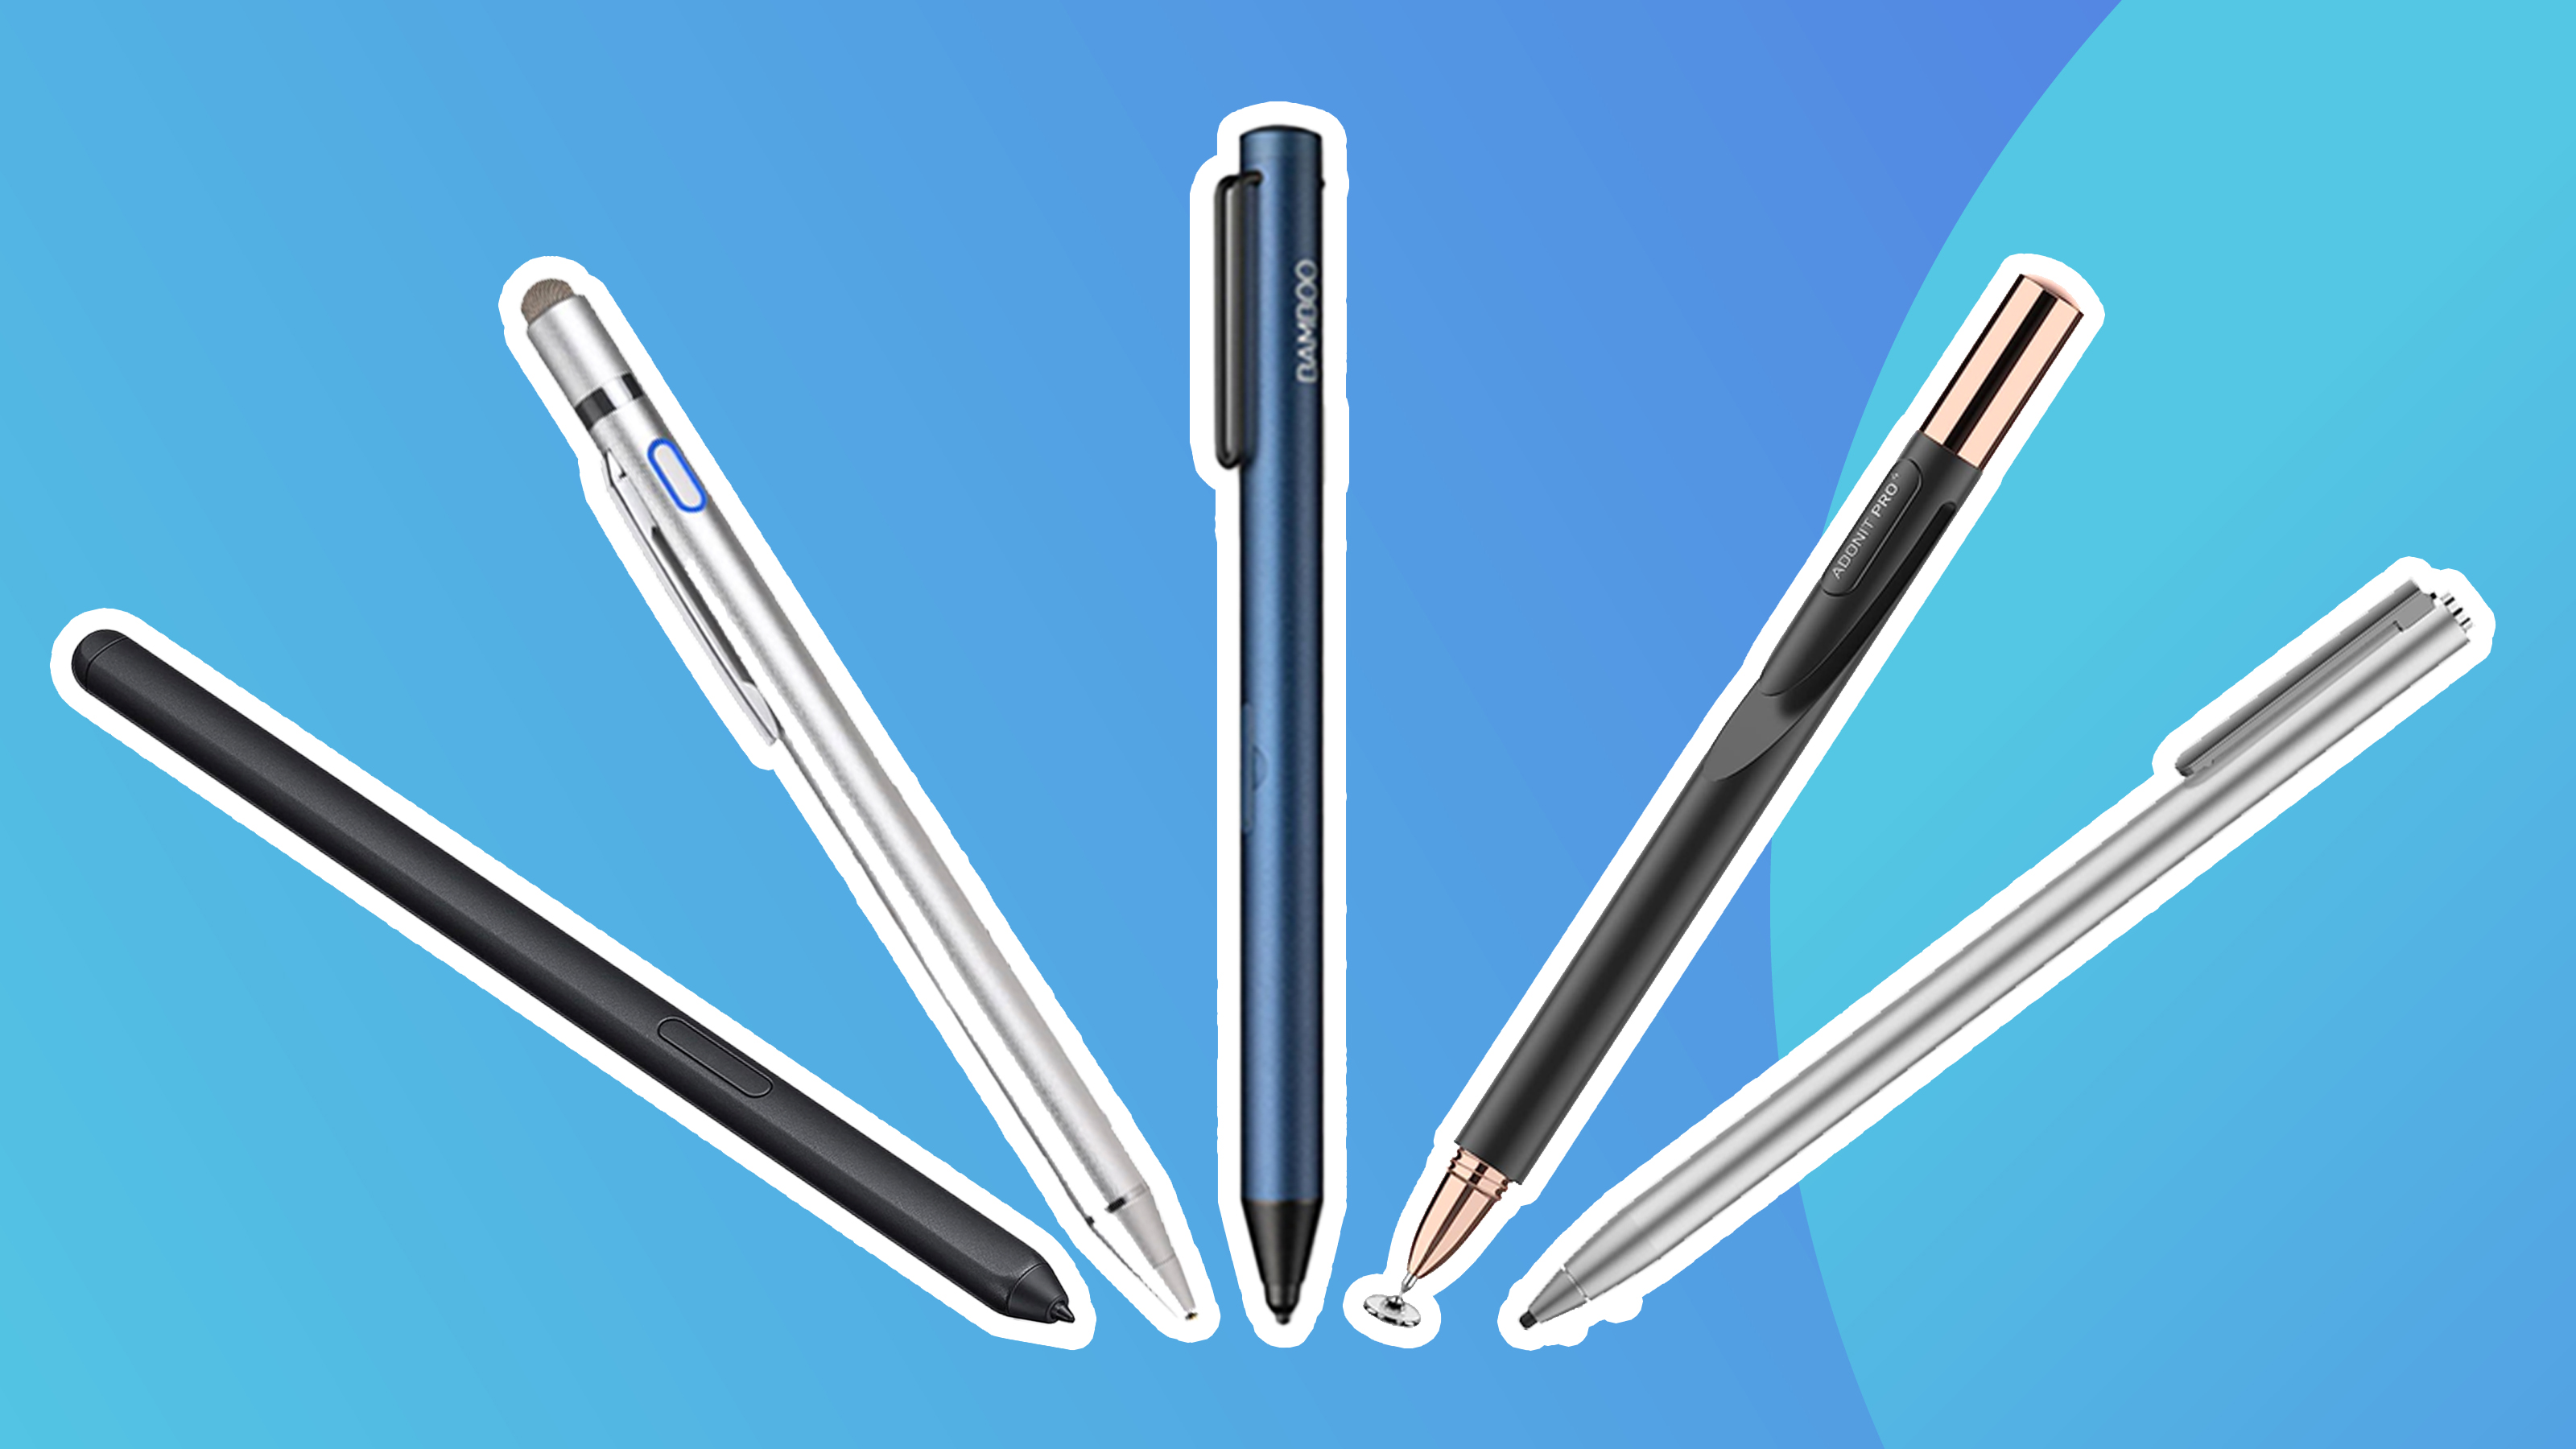 MEKO 3 in 1 Stylus Pens for Touch Screens, High Sensitivity & Precision  Capacitive Stylus Pencil for Apple iPad iPhone Tablets Samsung Galaxy All